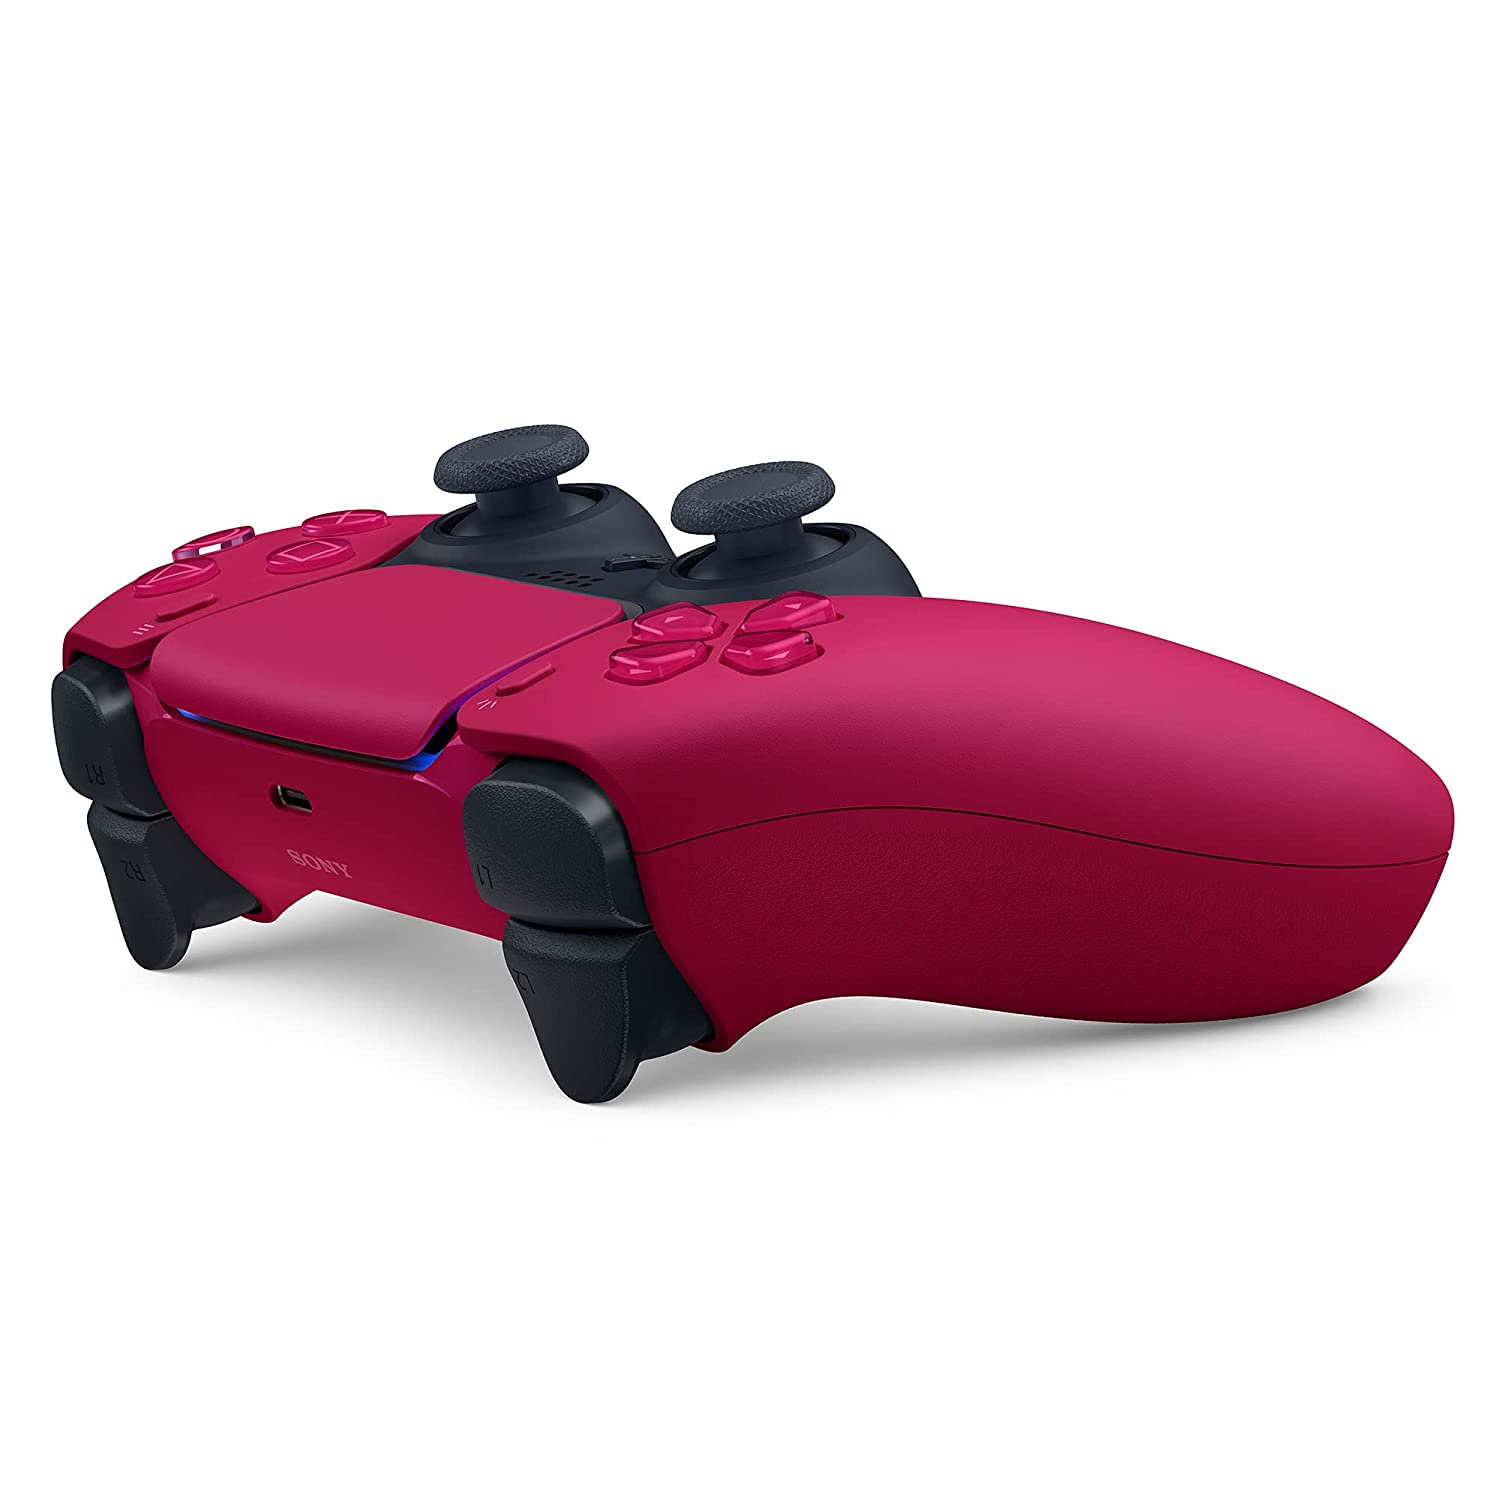 2 Pack Sony PlayStation 5 DualSense Wireless Controller - Cosmic Red - Pro-Distributing